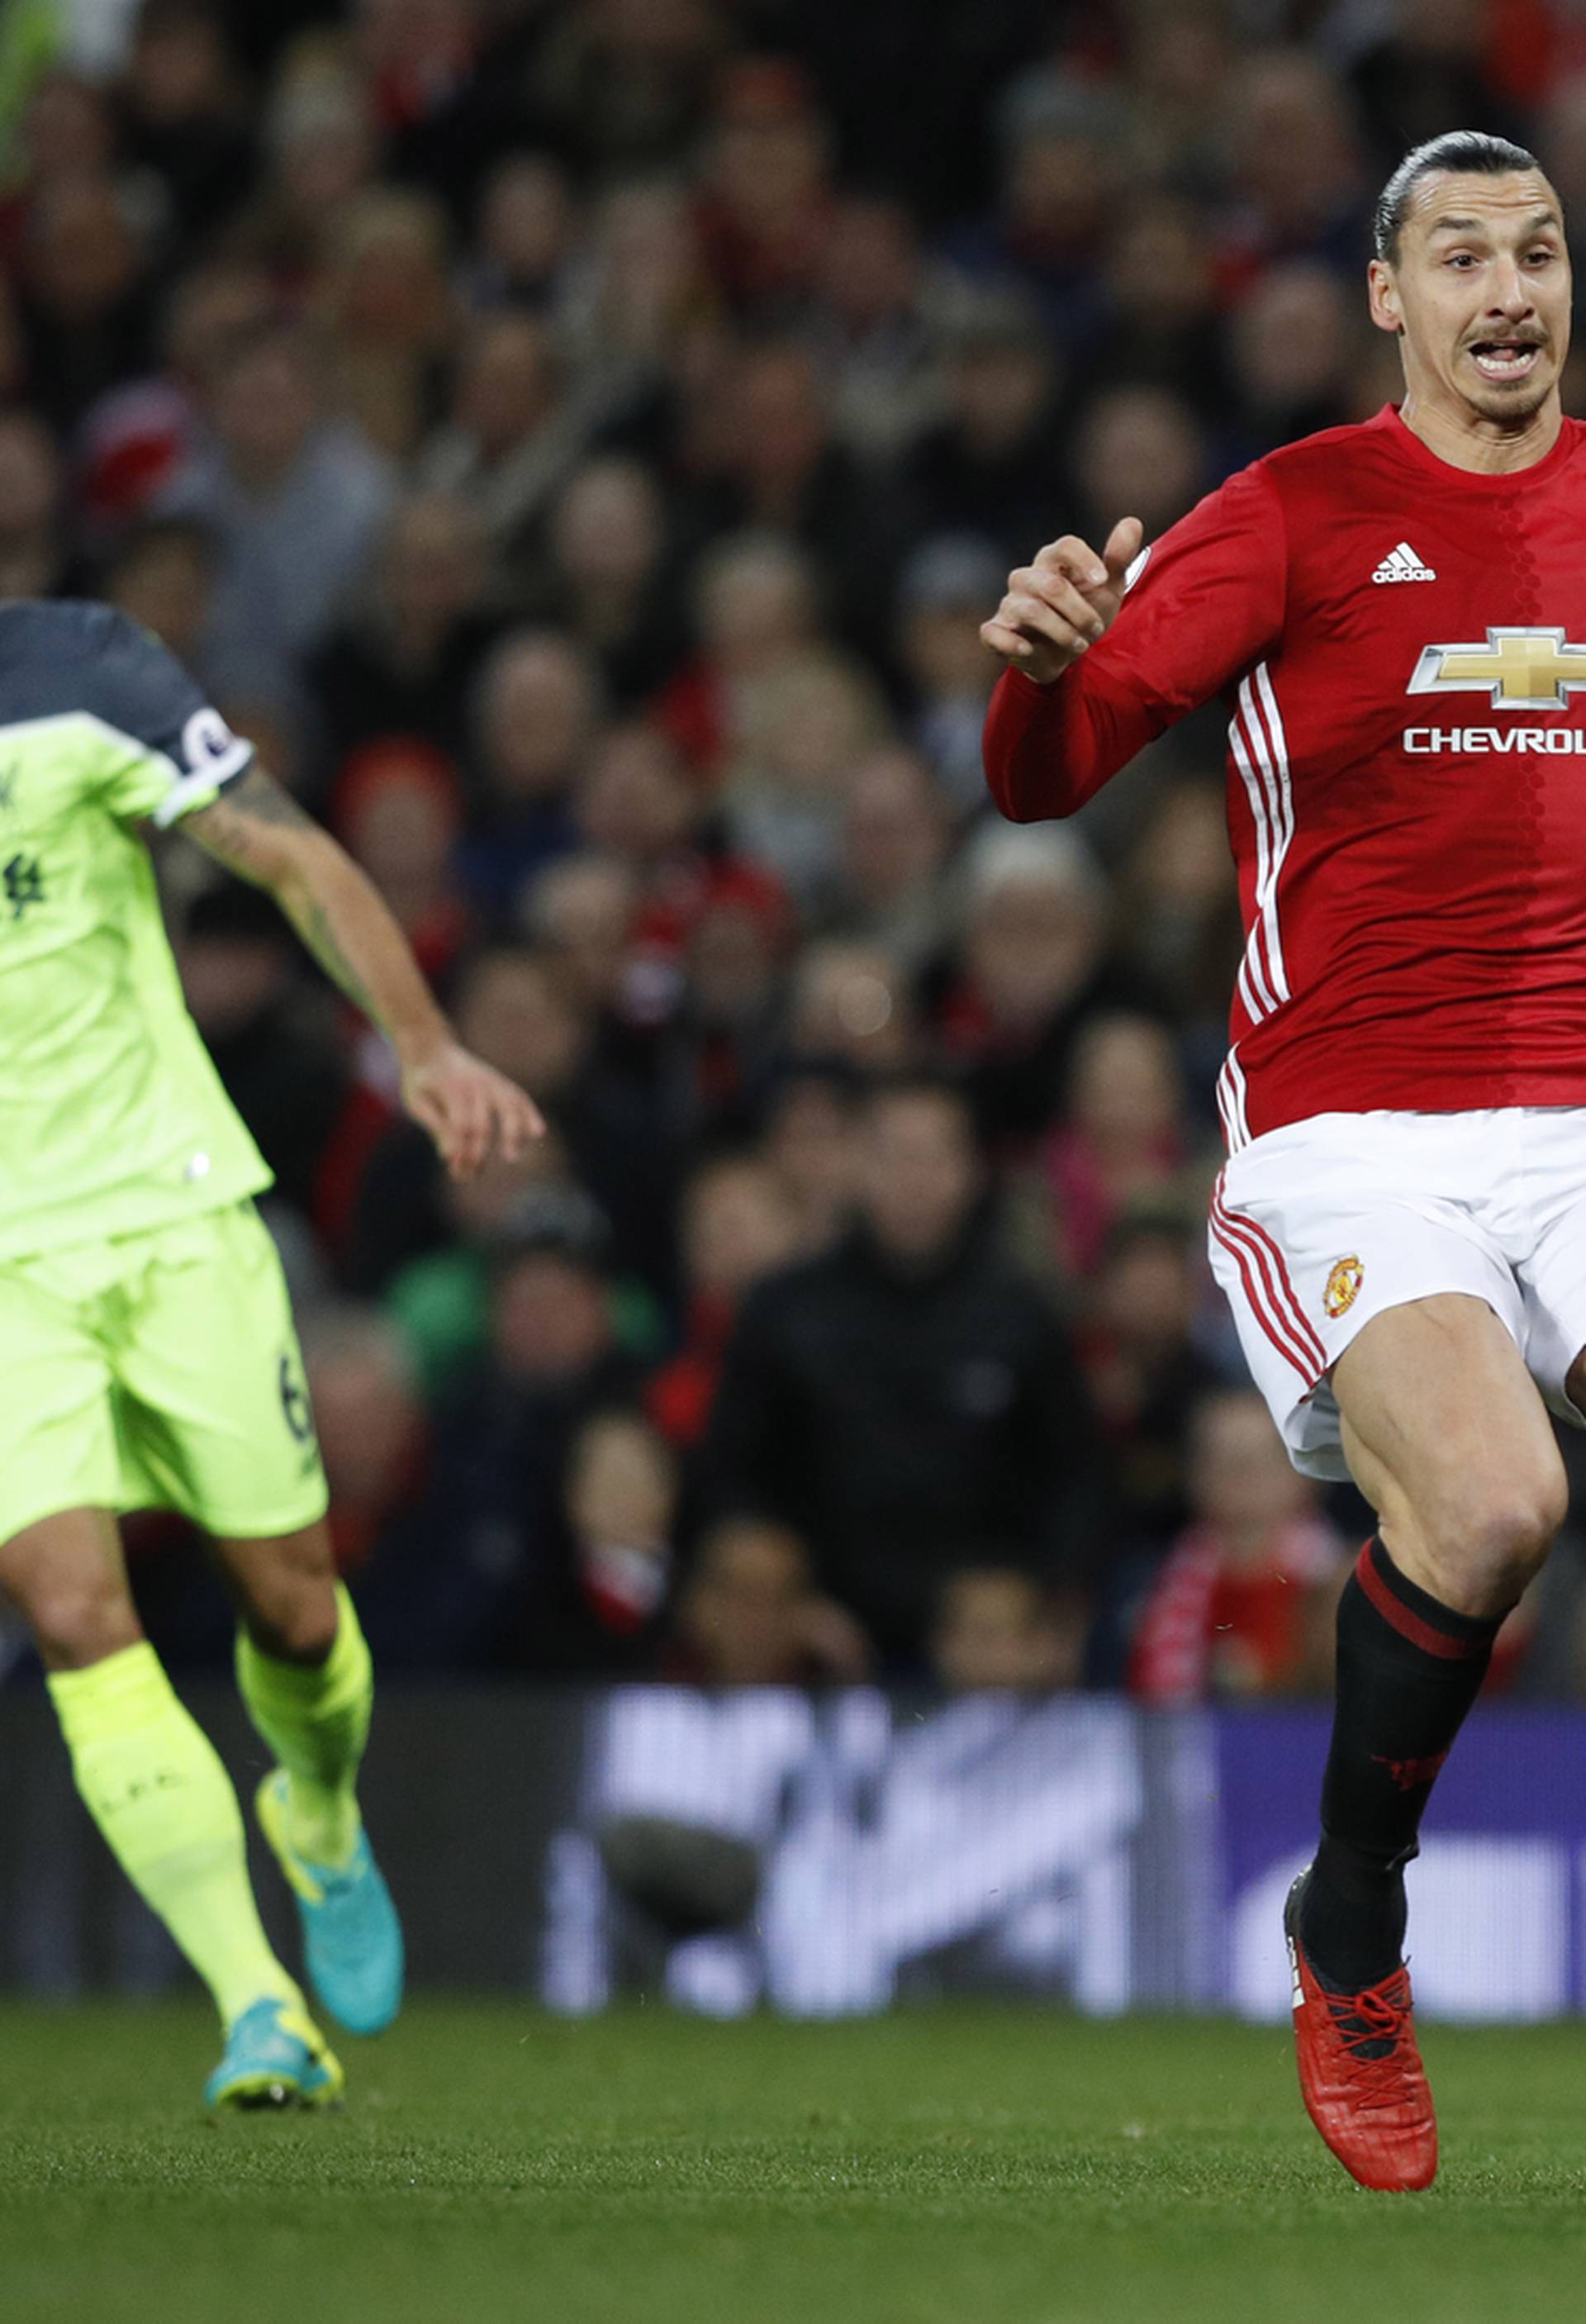 Manchester United's Zlatan Ibrahimovic blocks the clearance of Liverpool's Simon Mignolet